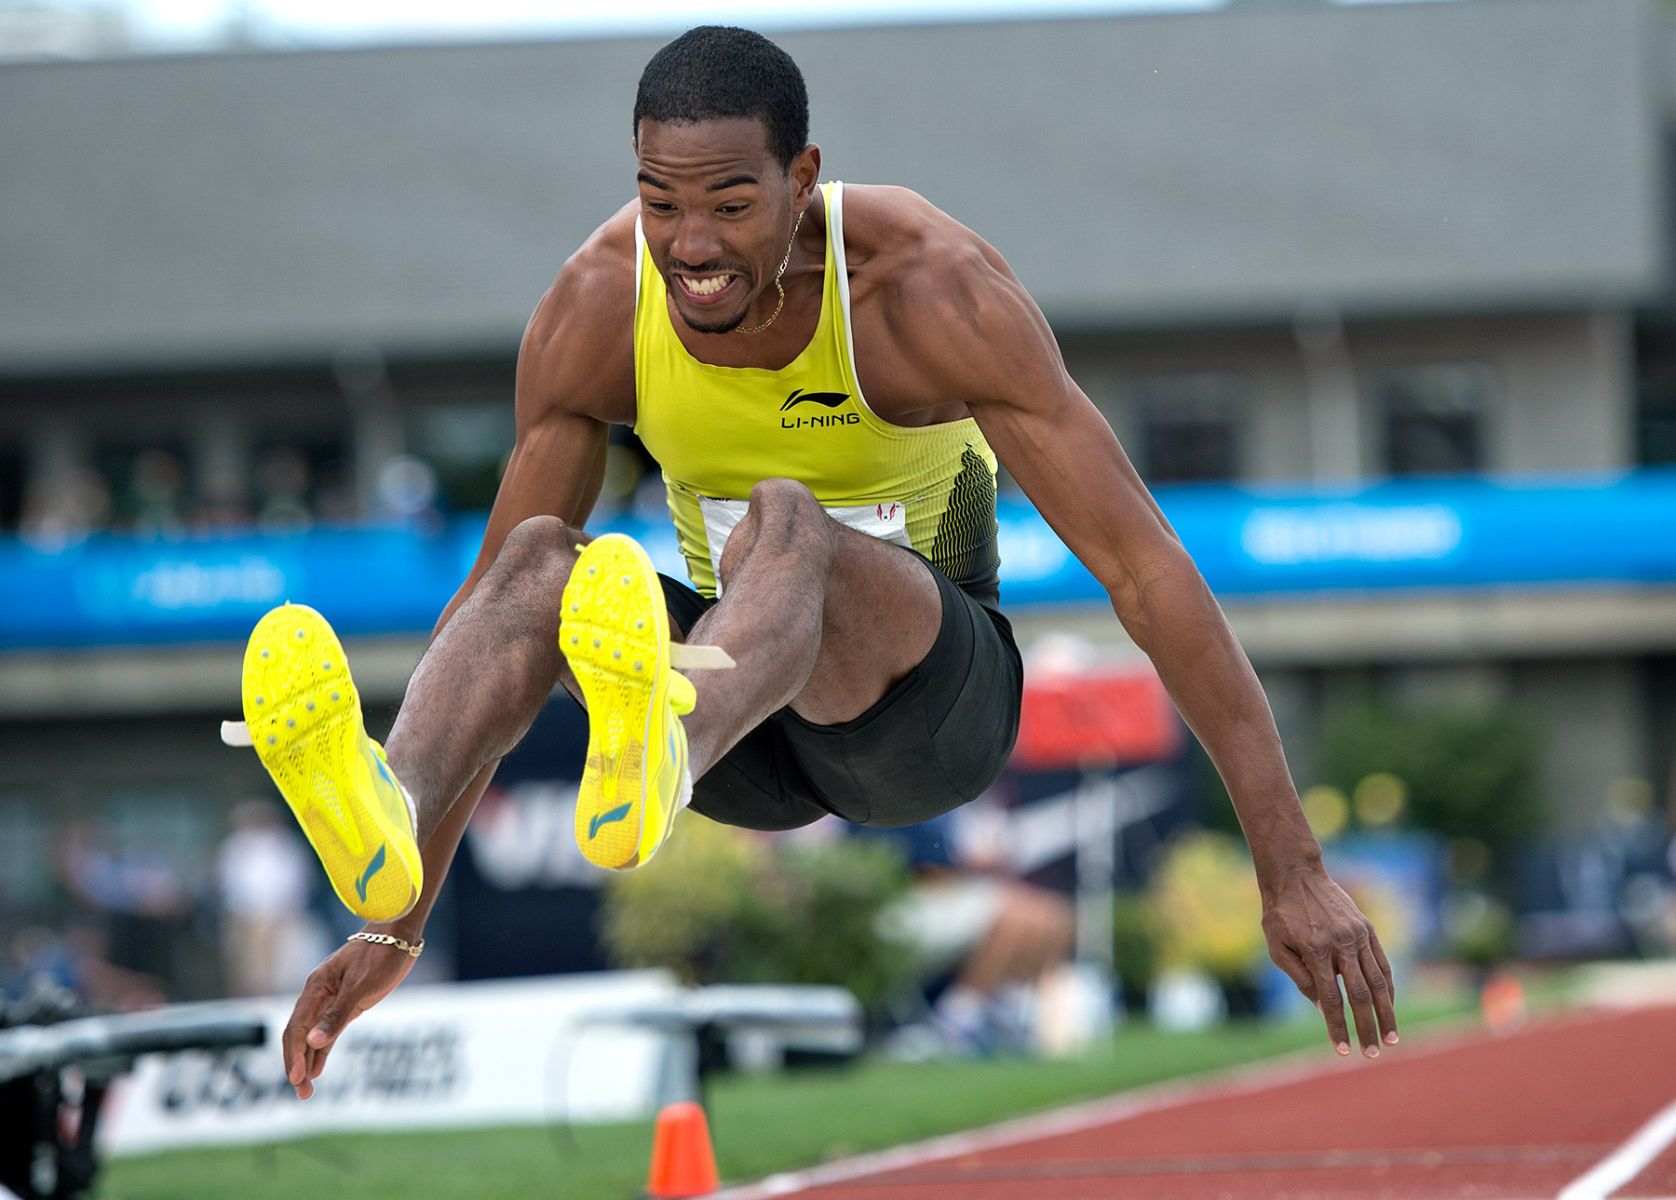 1ustrials_2012_charles_taylor_lj_track_and_field_image_jeff_cohen_photo_lb.jpg